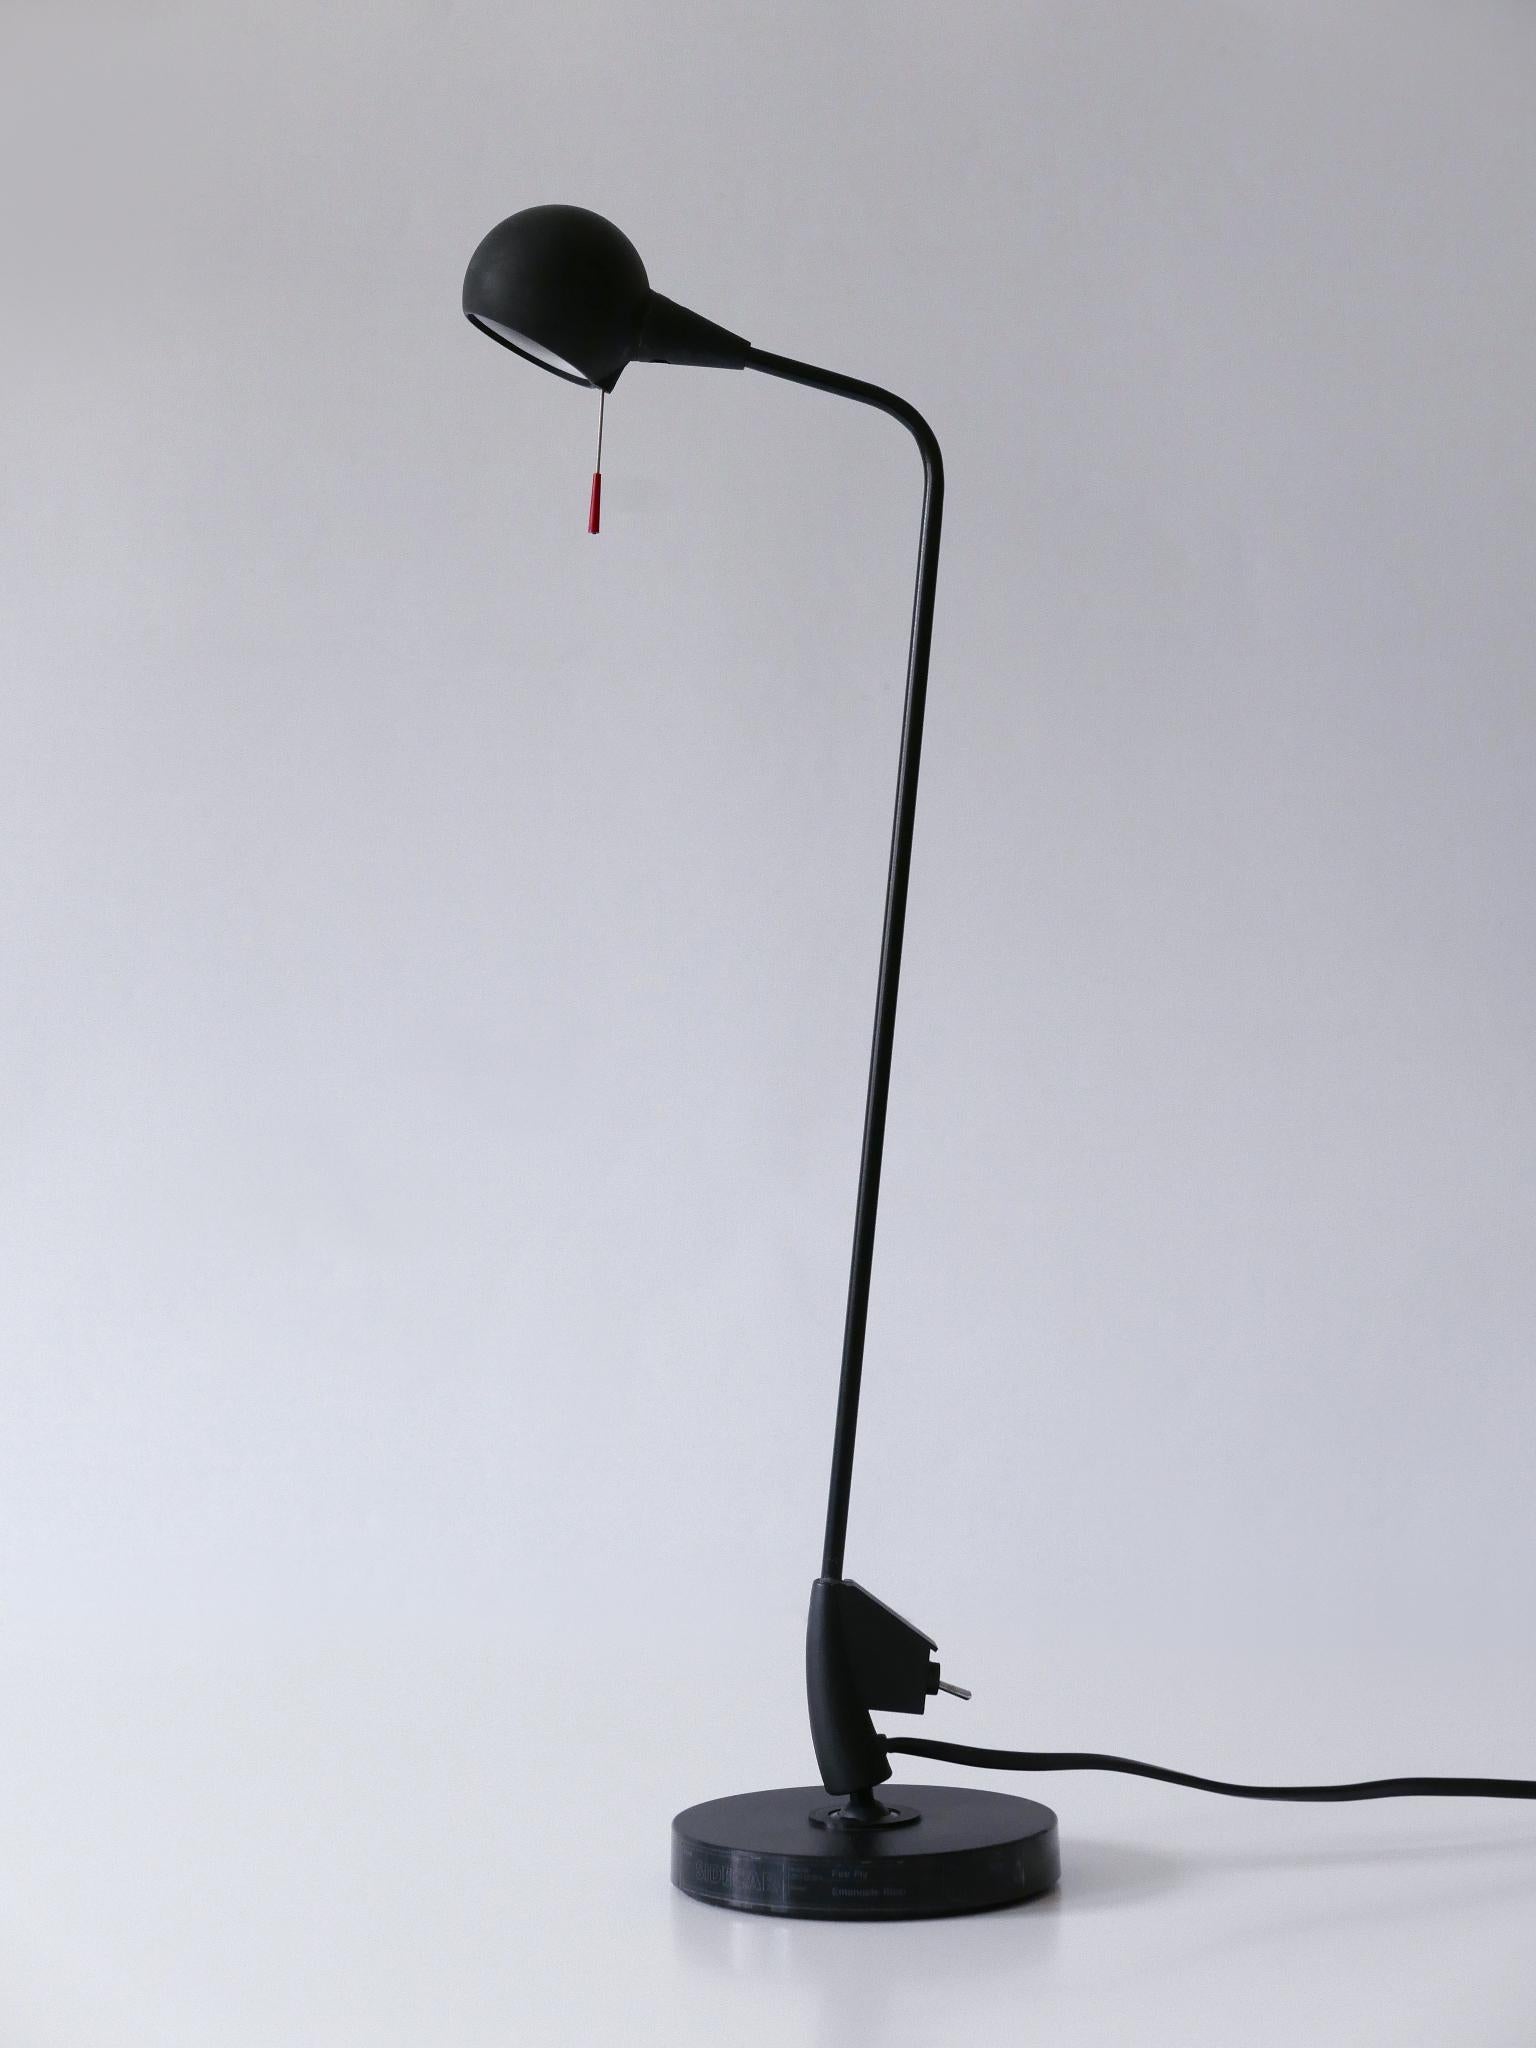 Adjustable Postmodern Table Lamp Fire Fly by Emanuele Ricci for Artemide 1989 For Sale 4